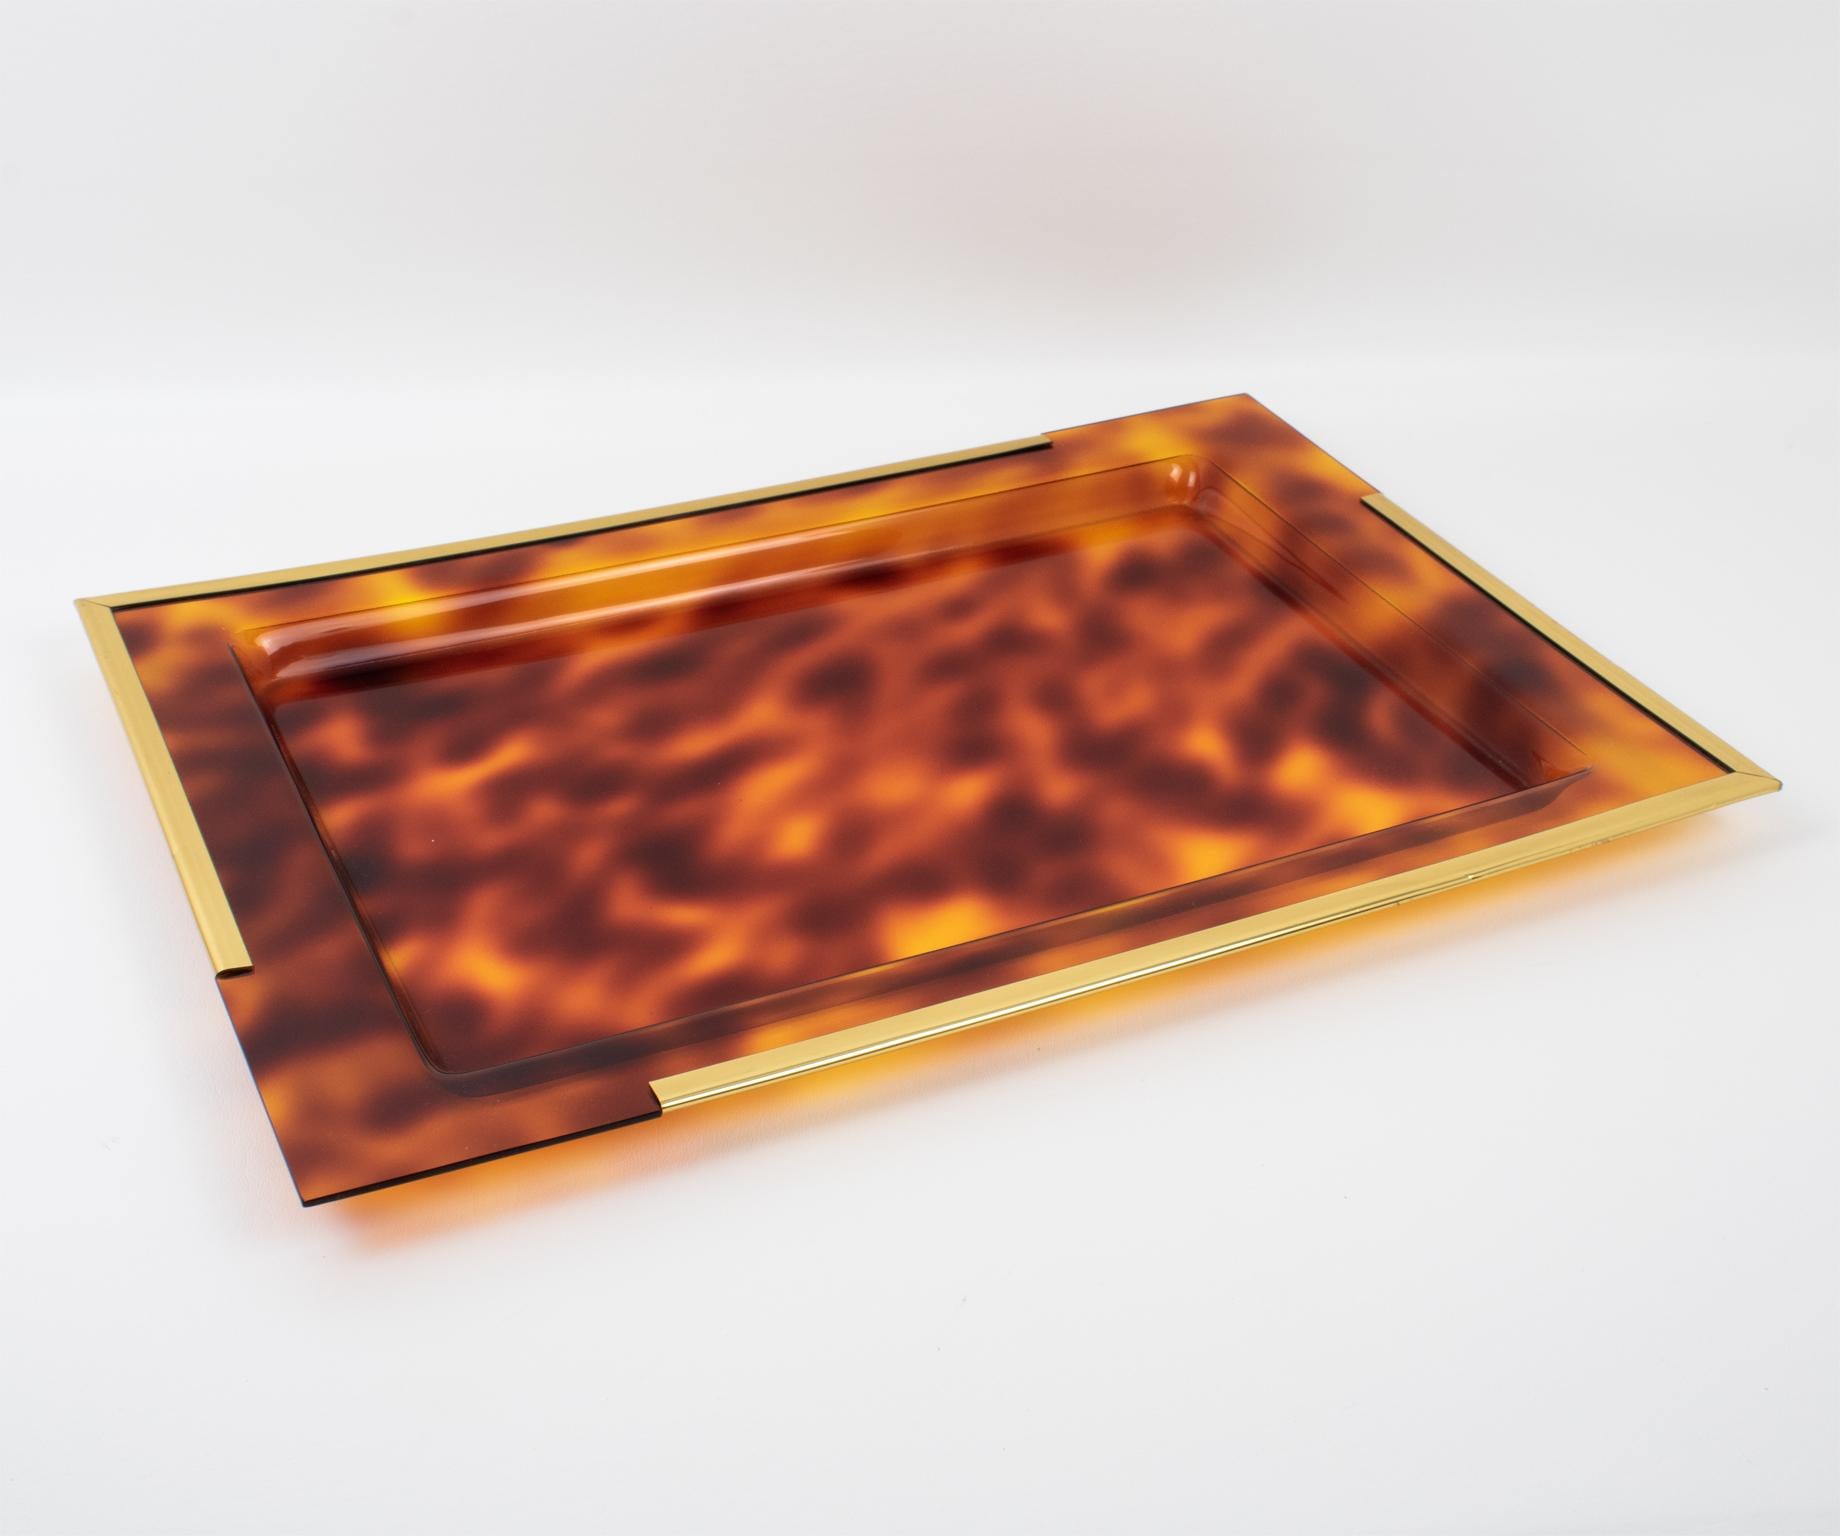 This stunning Mid-Century modernist barware serving tray or platter was crafted in Italy in the 1970s. The large rectangular shape boasts a raised Lucite insert with a faux tortoiseshell (tortoise) textured pattern in light colors and a polished